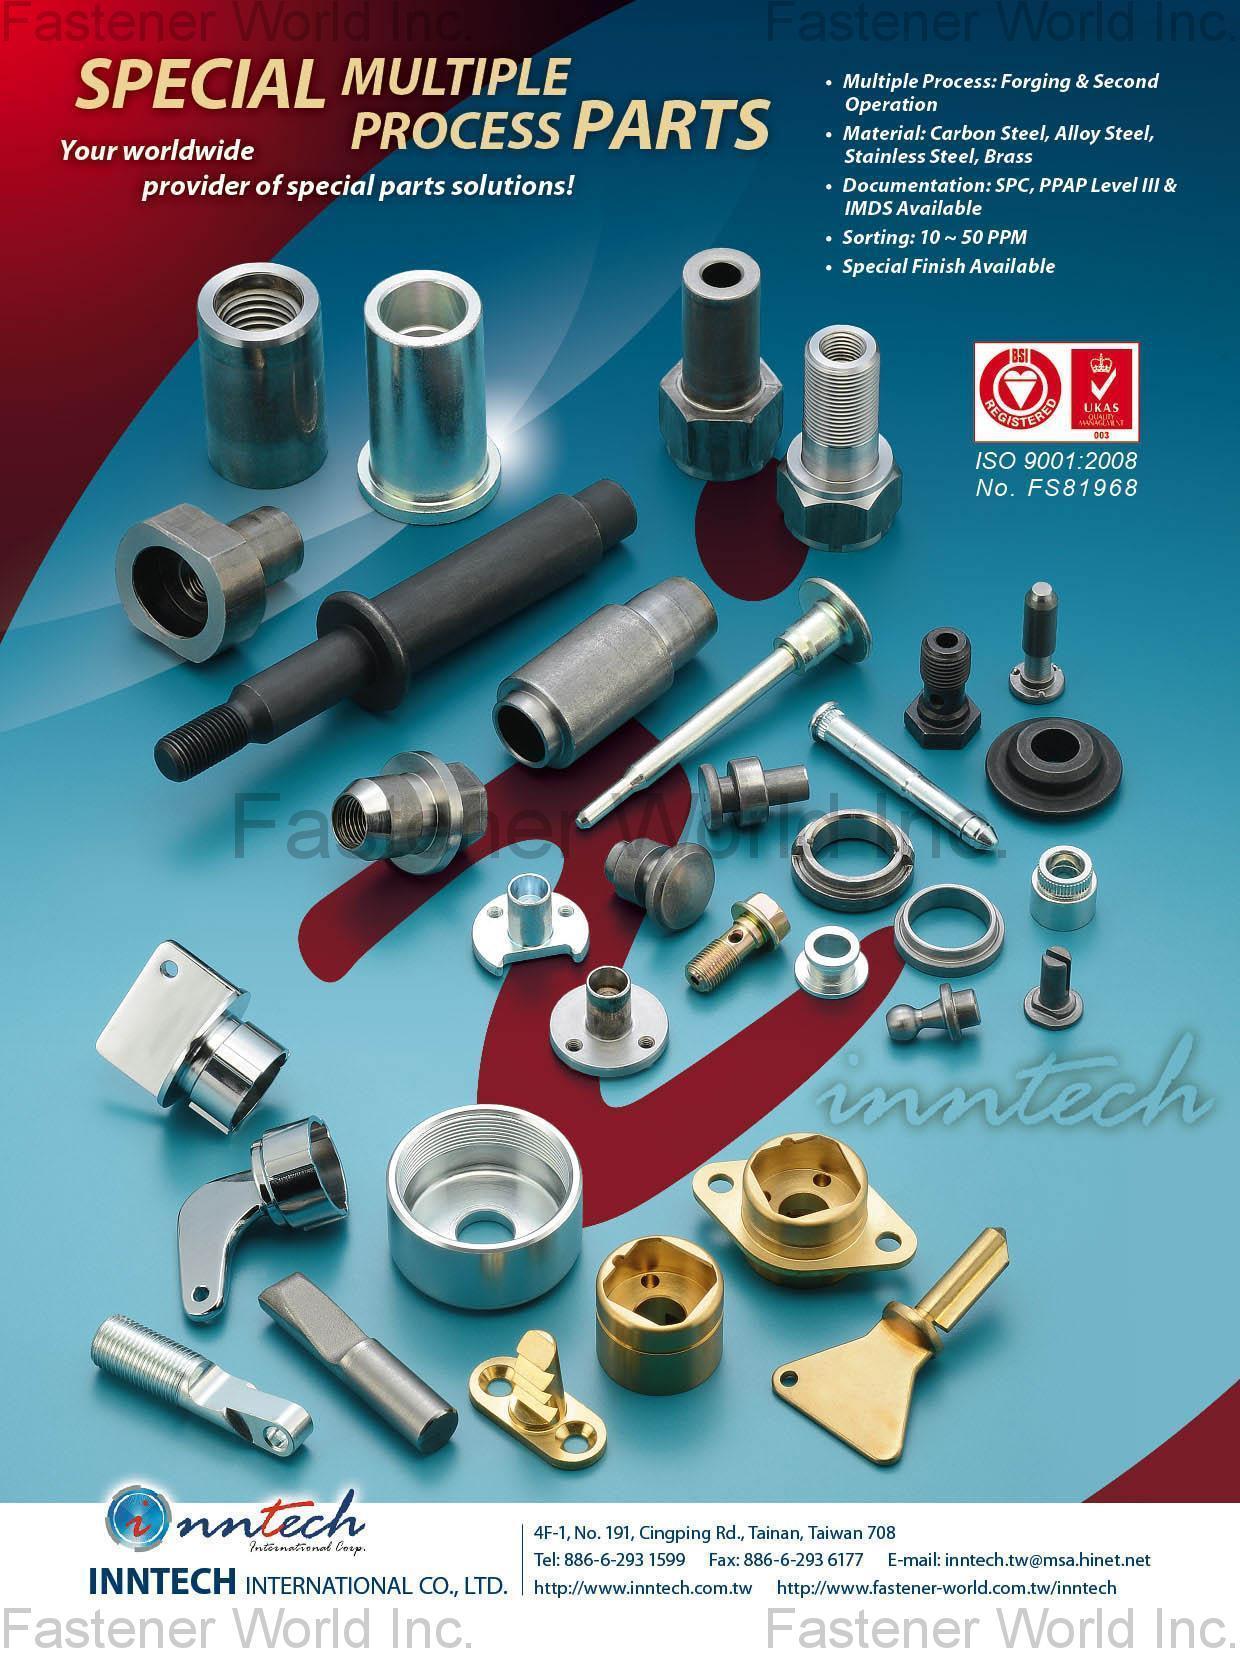 INNTECH INTERNATIONAL CO., LTD.  , OEM Quality Fasteners, Precision Turning, Metal Stamping, Patent, Open Die, Casting, Plastic Injection Molding, Metal Injection Molding, Powder Metal, Glass To Metal Seal, Wire Form, Second Operation, Spring, Assembly , Cnc Machining Parts